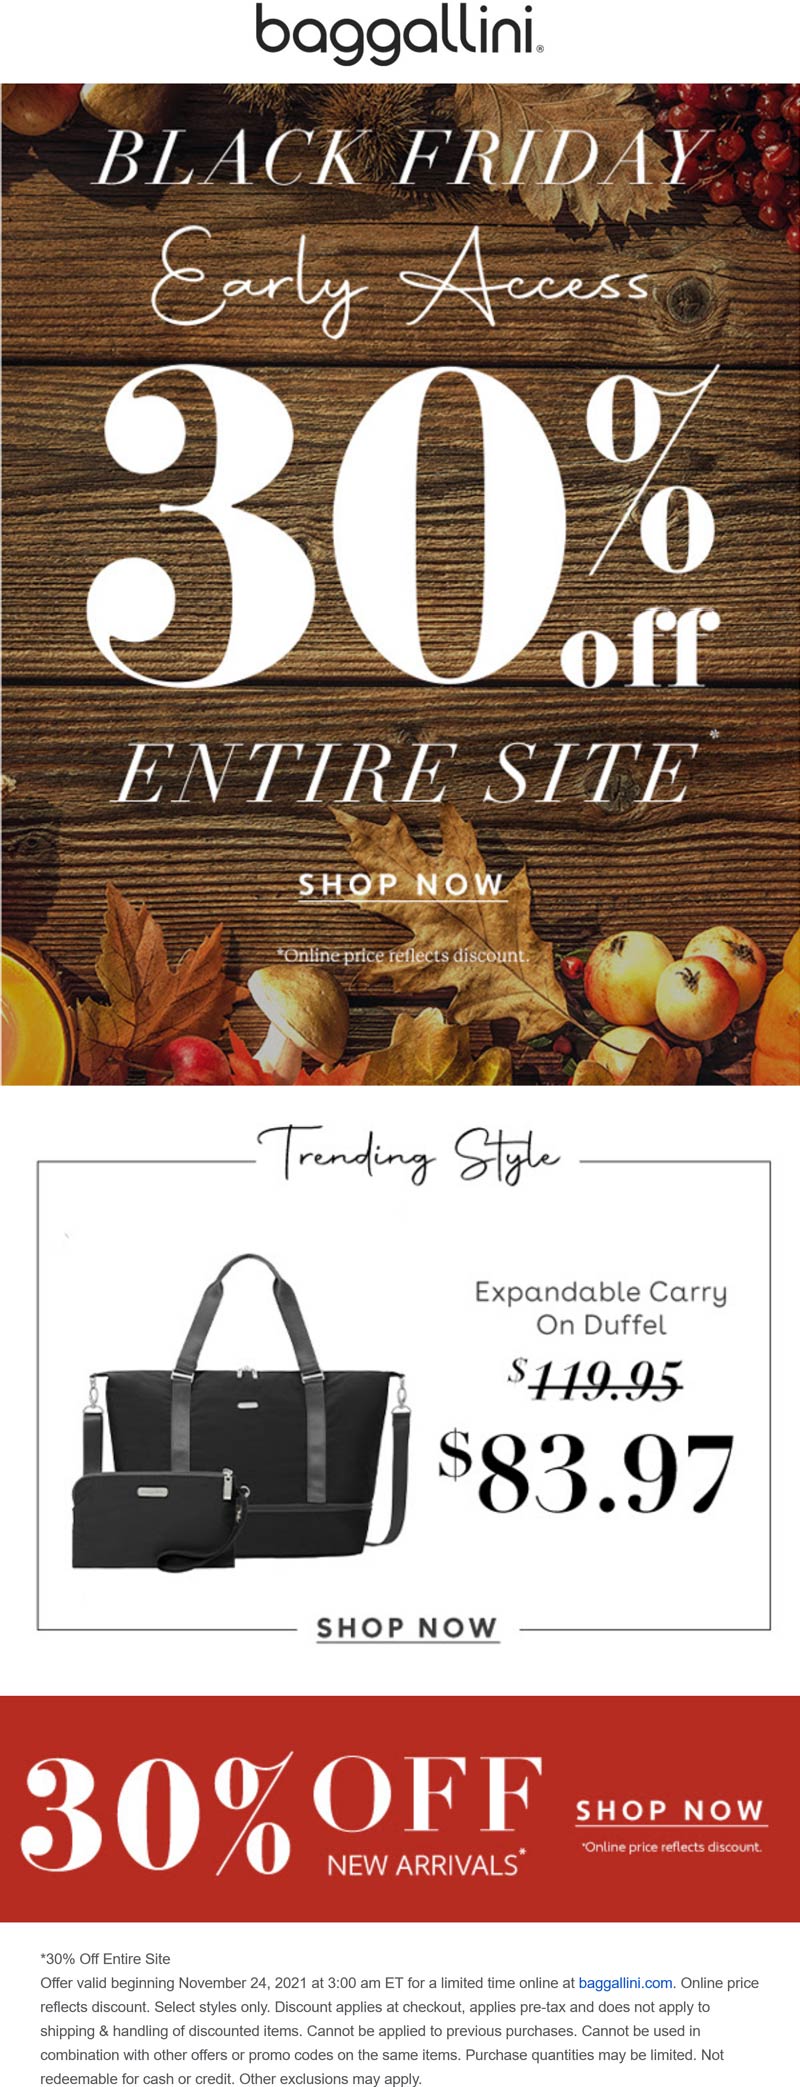 Baggallini stores Coupon  30% off everything online at Baggallini #baggallini 